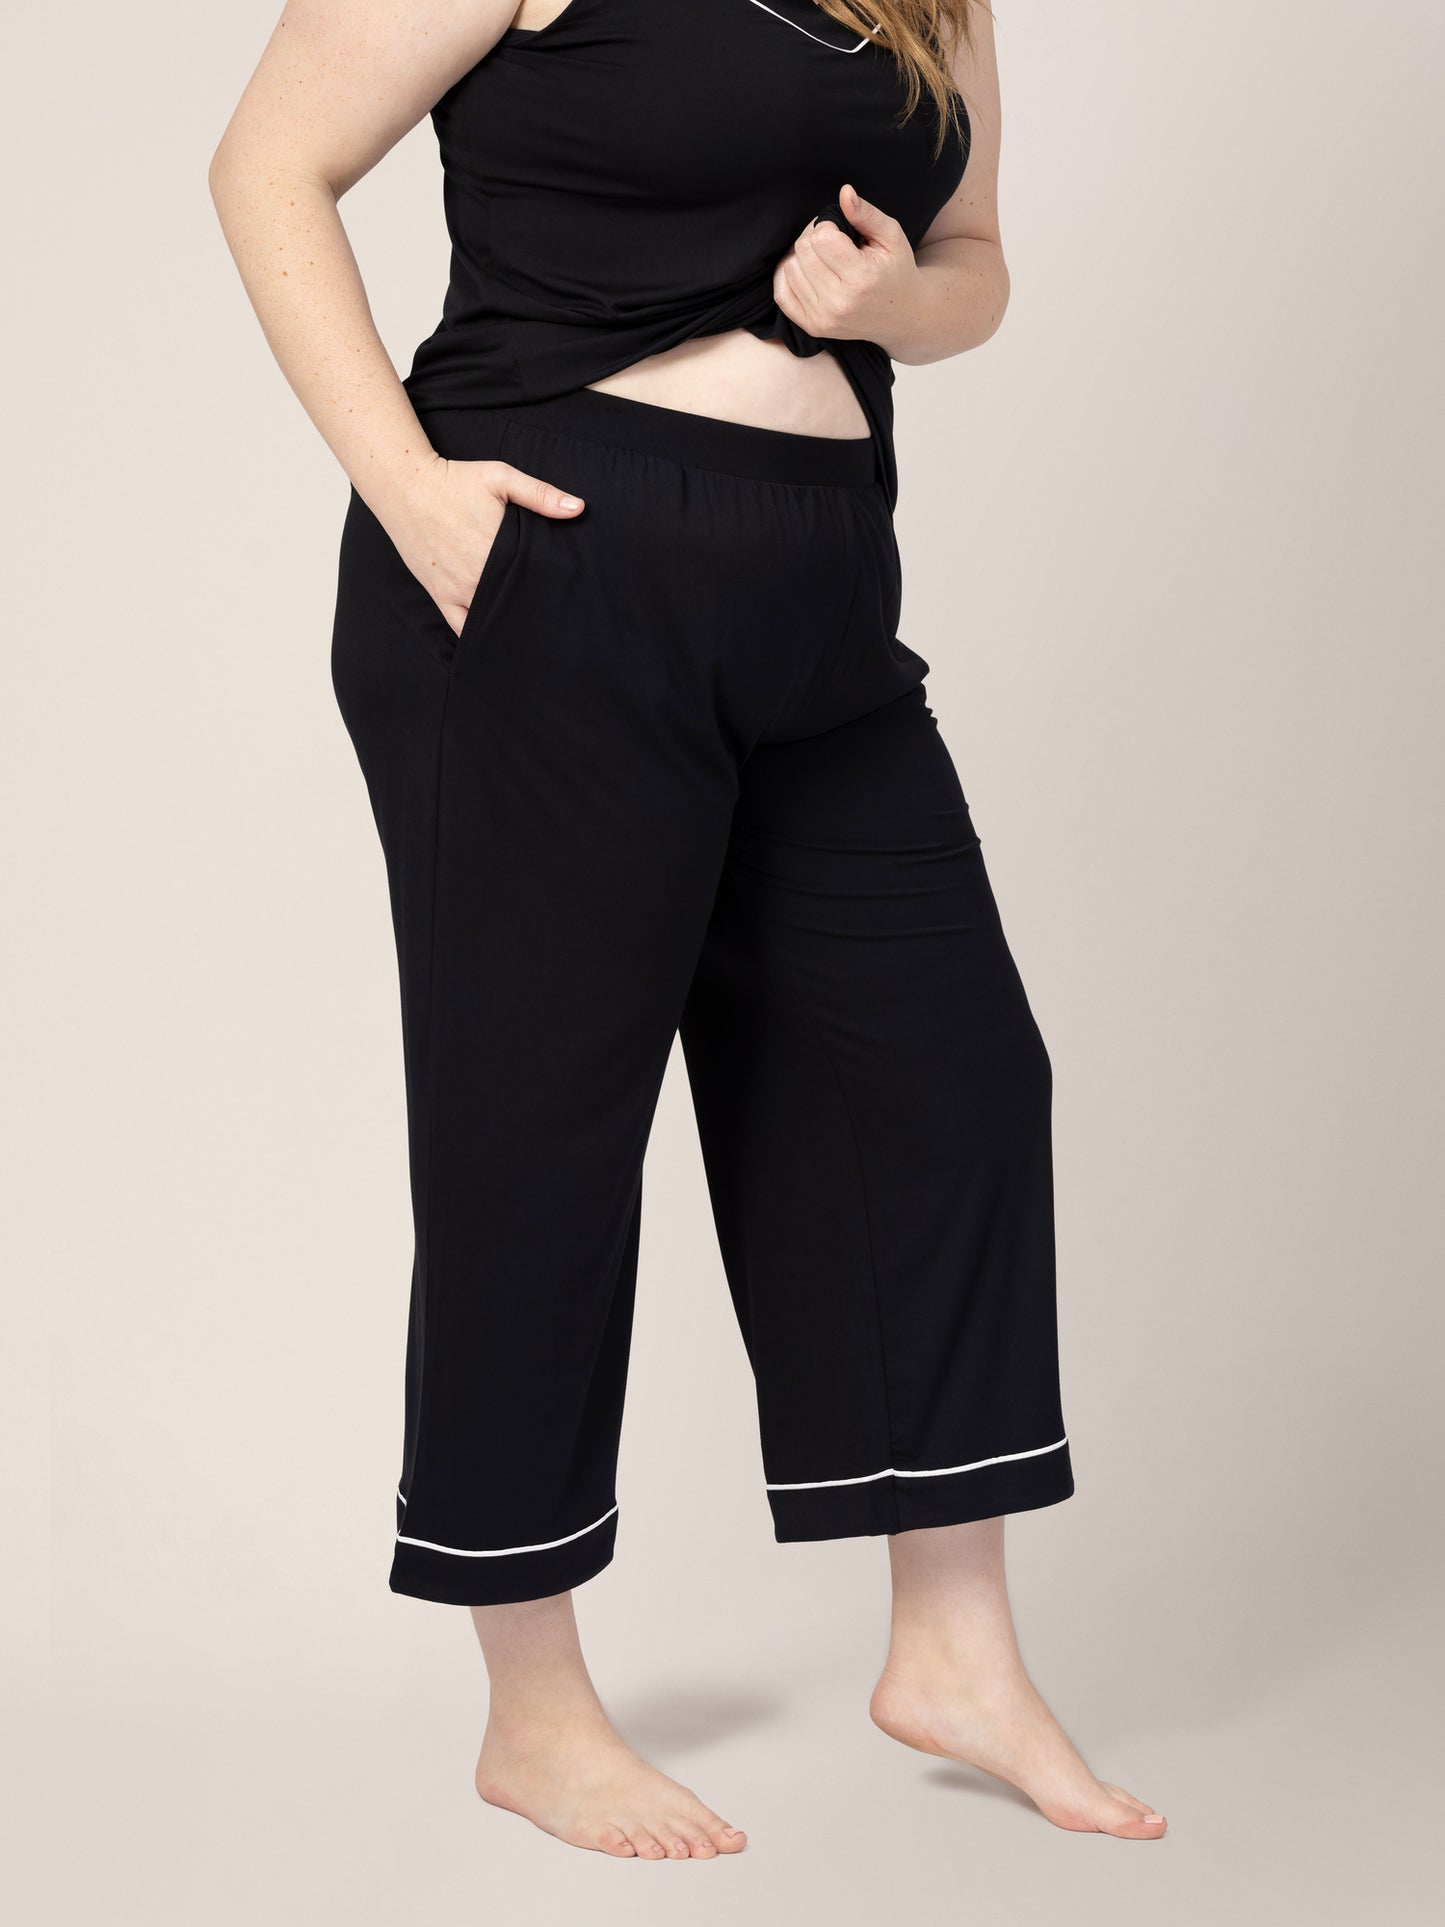 Close-up of waistband on model wearing Clea Bamboo Nursing Tank & Capri Pajama Set in Black, with hand in pocket